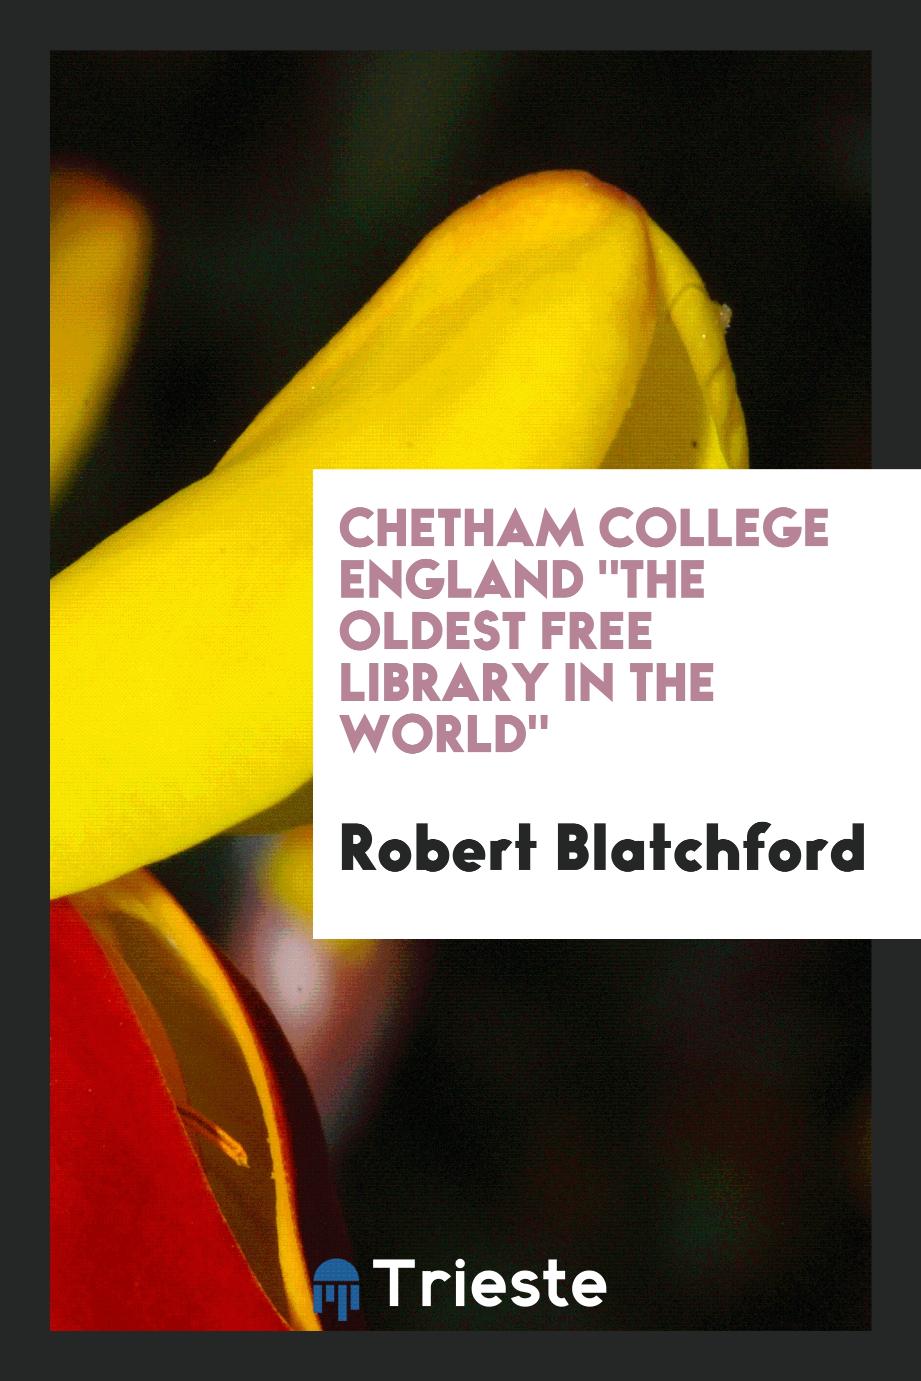 Chetham College England "the Oldest Free Library in the World"